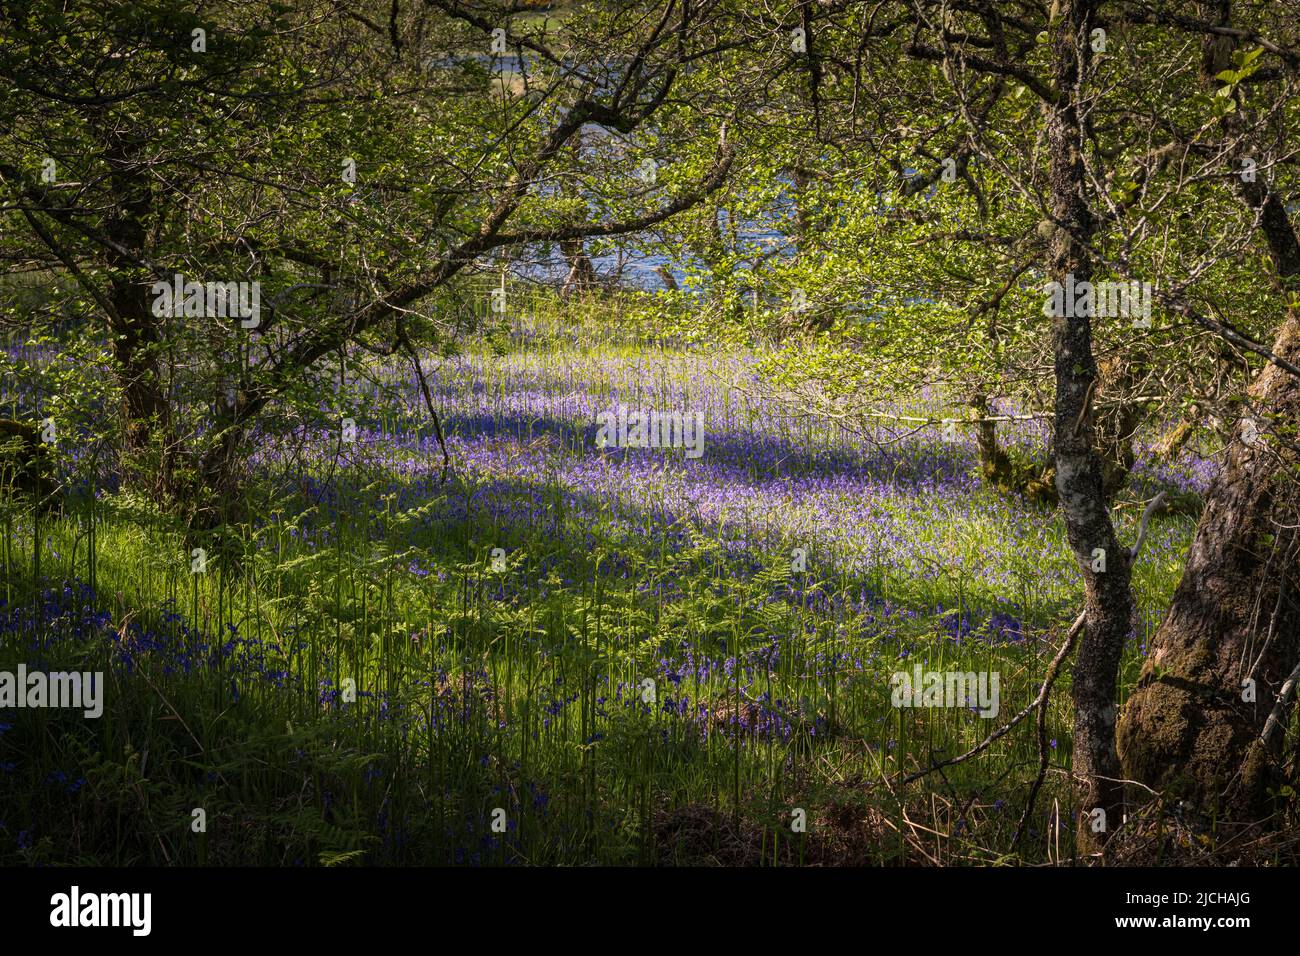 A sunny, summer HDR image of a Bluebell, Hyacinthoides non-scripta, wood on the banks of the River Glass in Strathglass, Scotland. 02 June 2022 Stock Photo